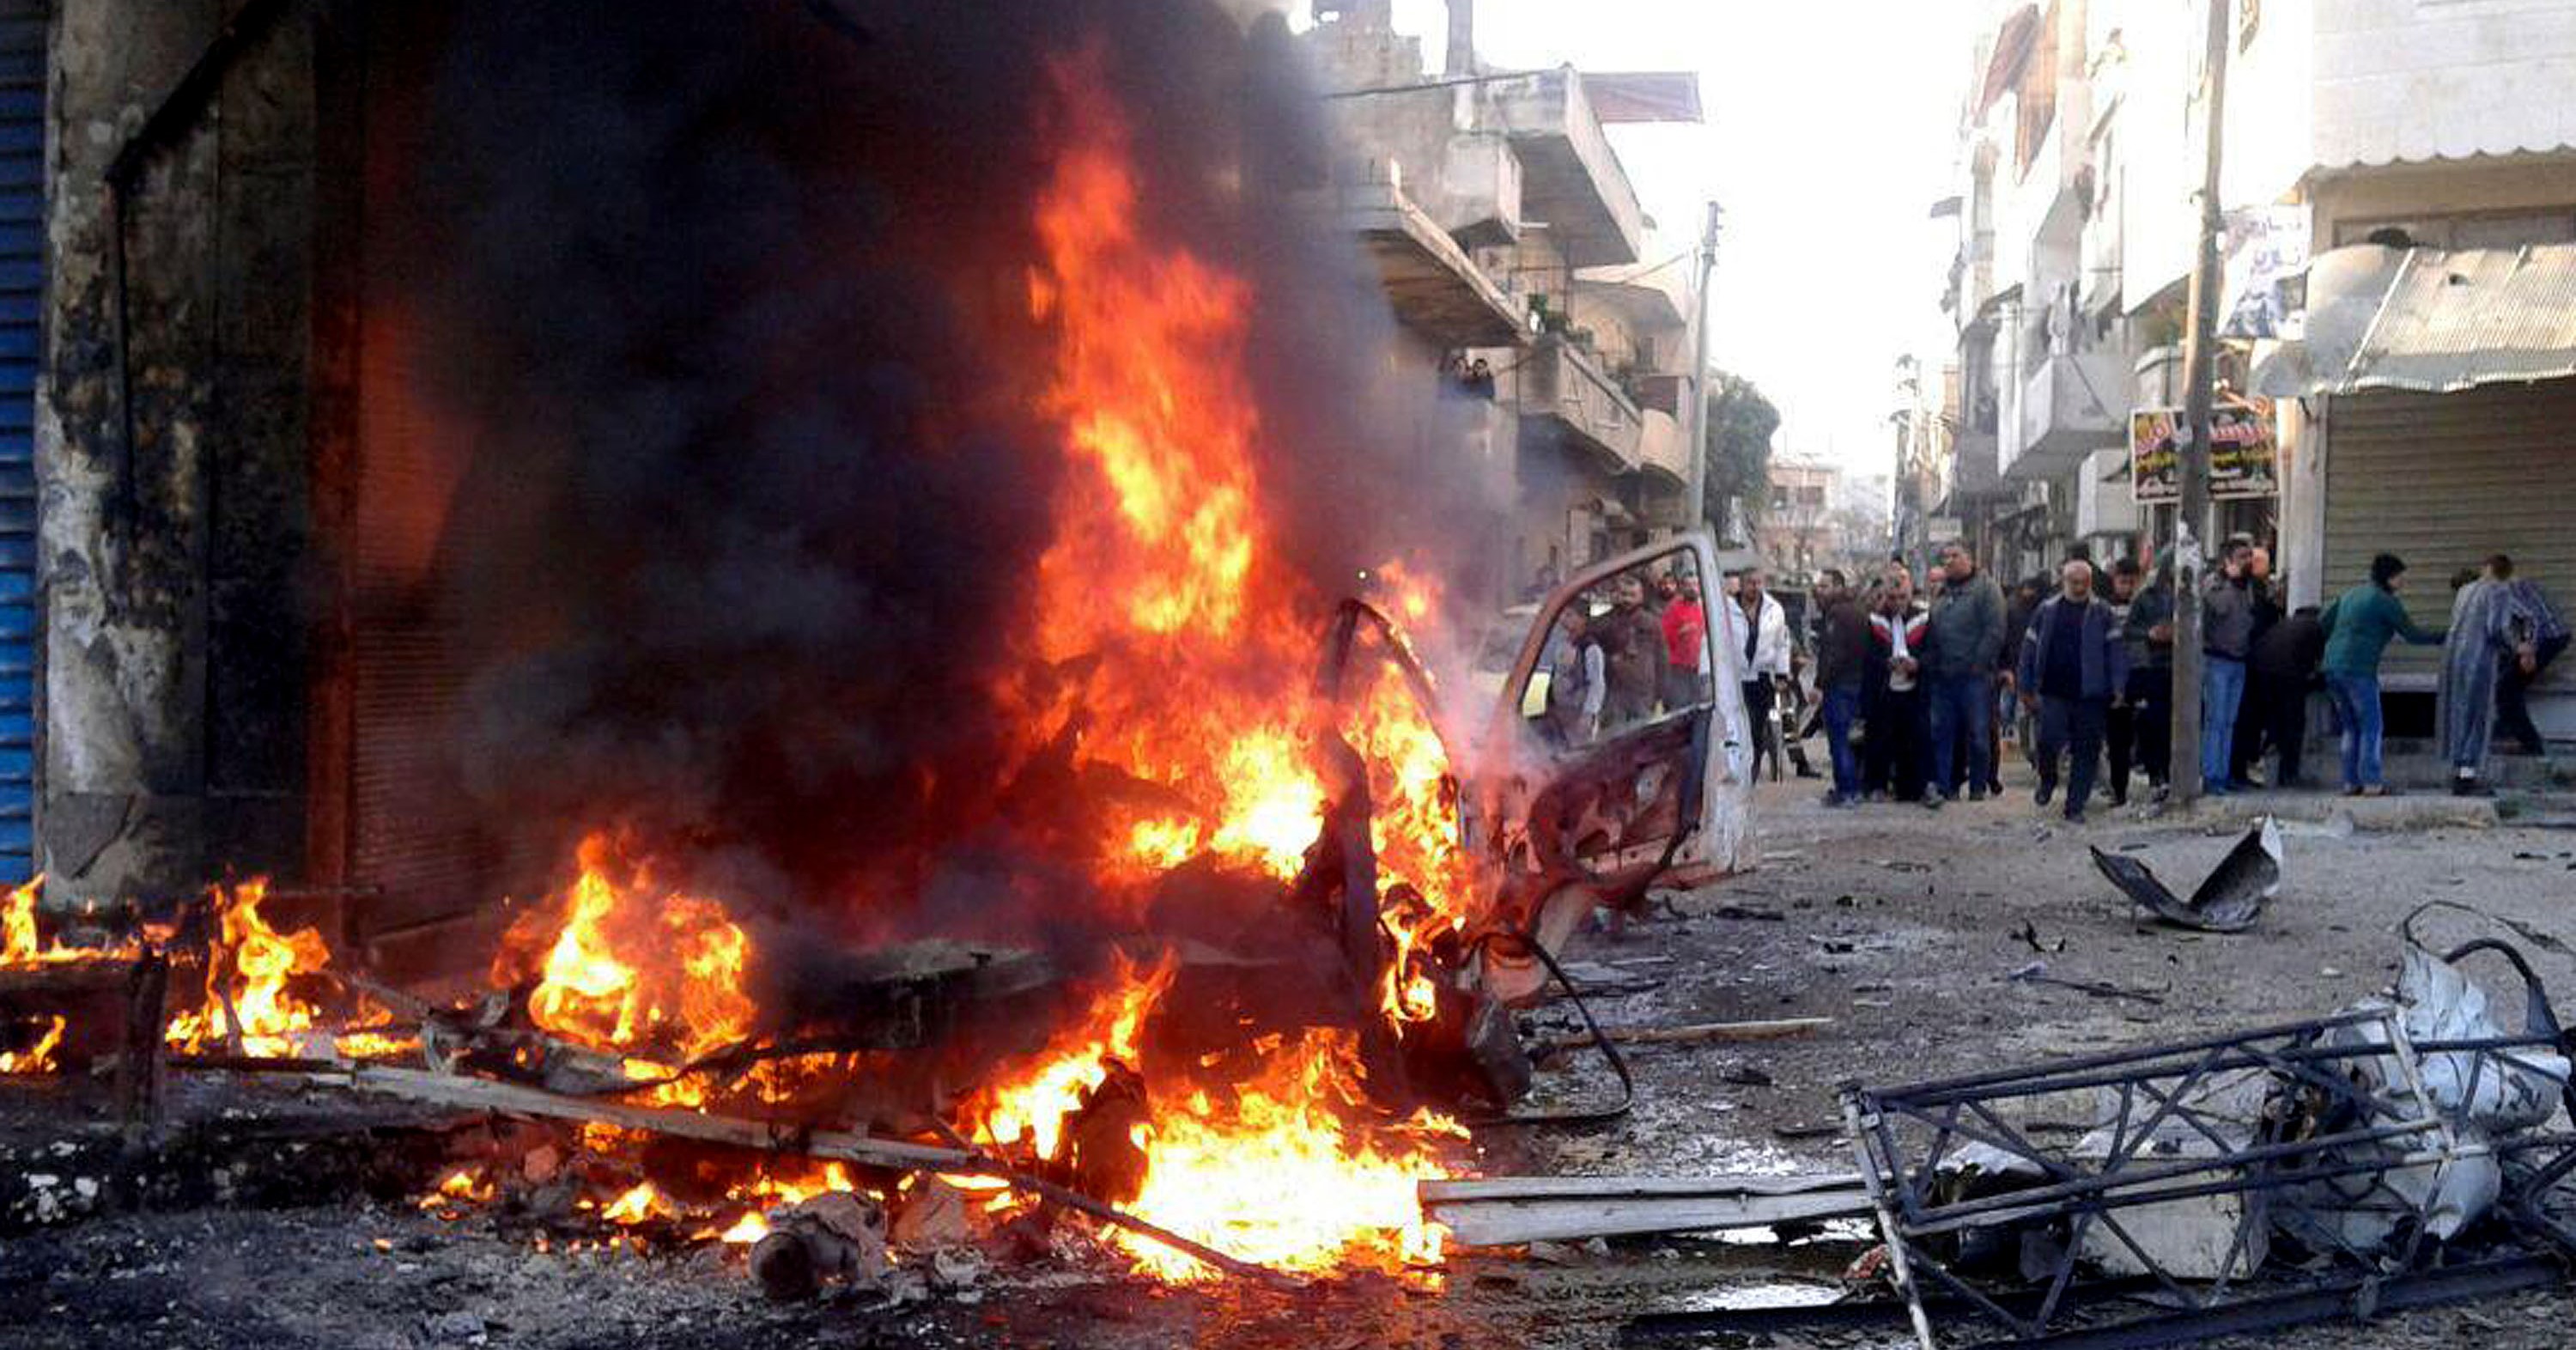 Car bomb explodes in vegetable market in northern Syria - state media